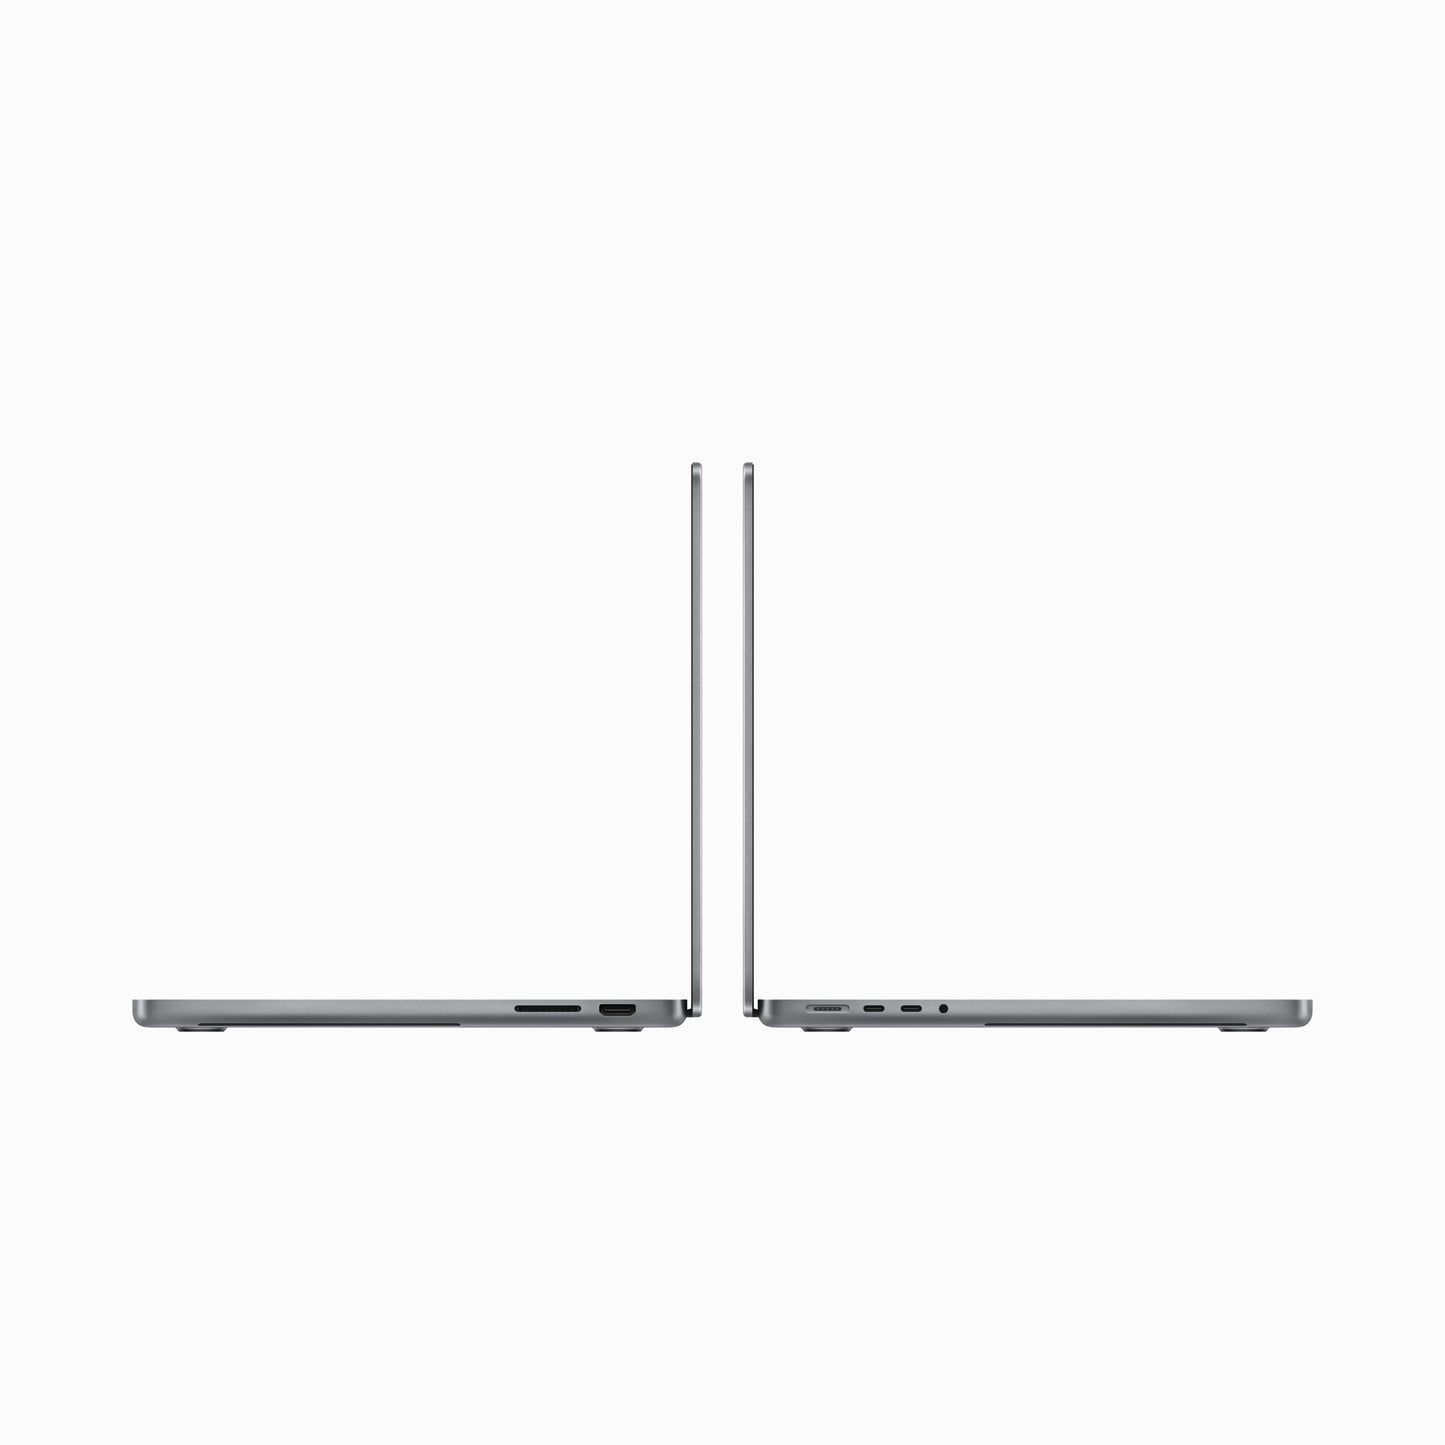 14-inch MacBook Pro: Apple M3 chip with 8‑core CPU and 10‑core GPU, 1TB SSD - Space Gray